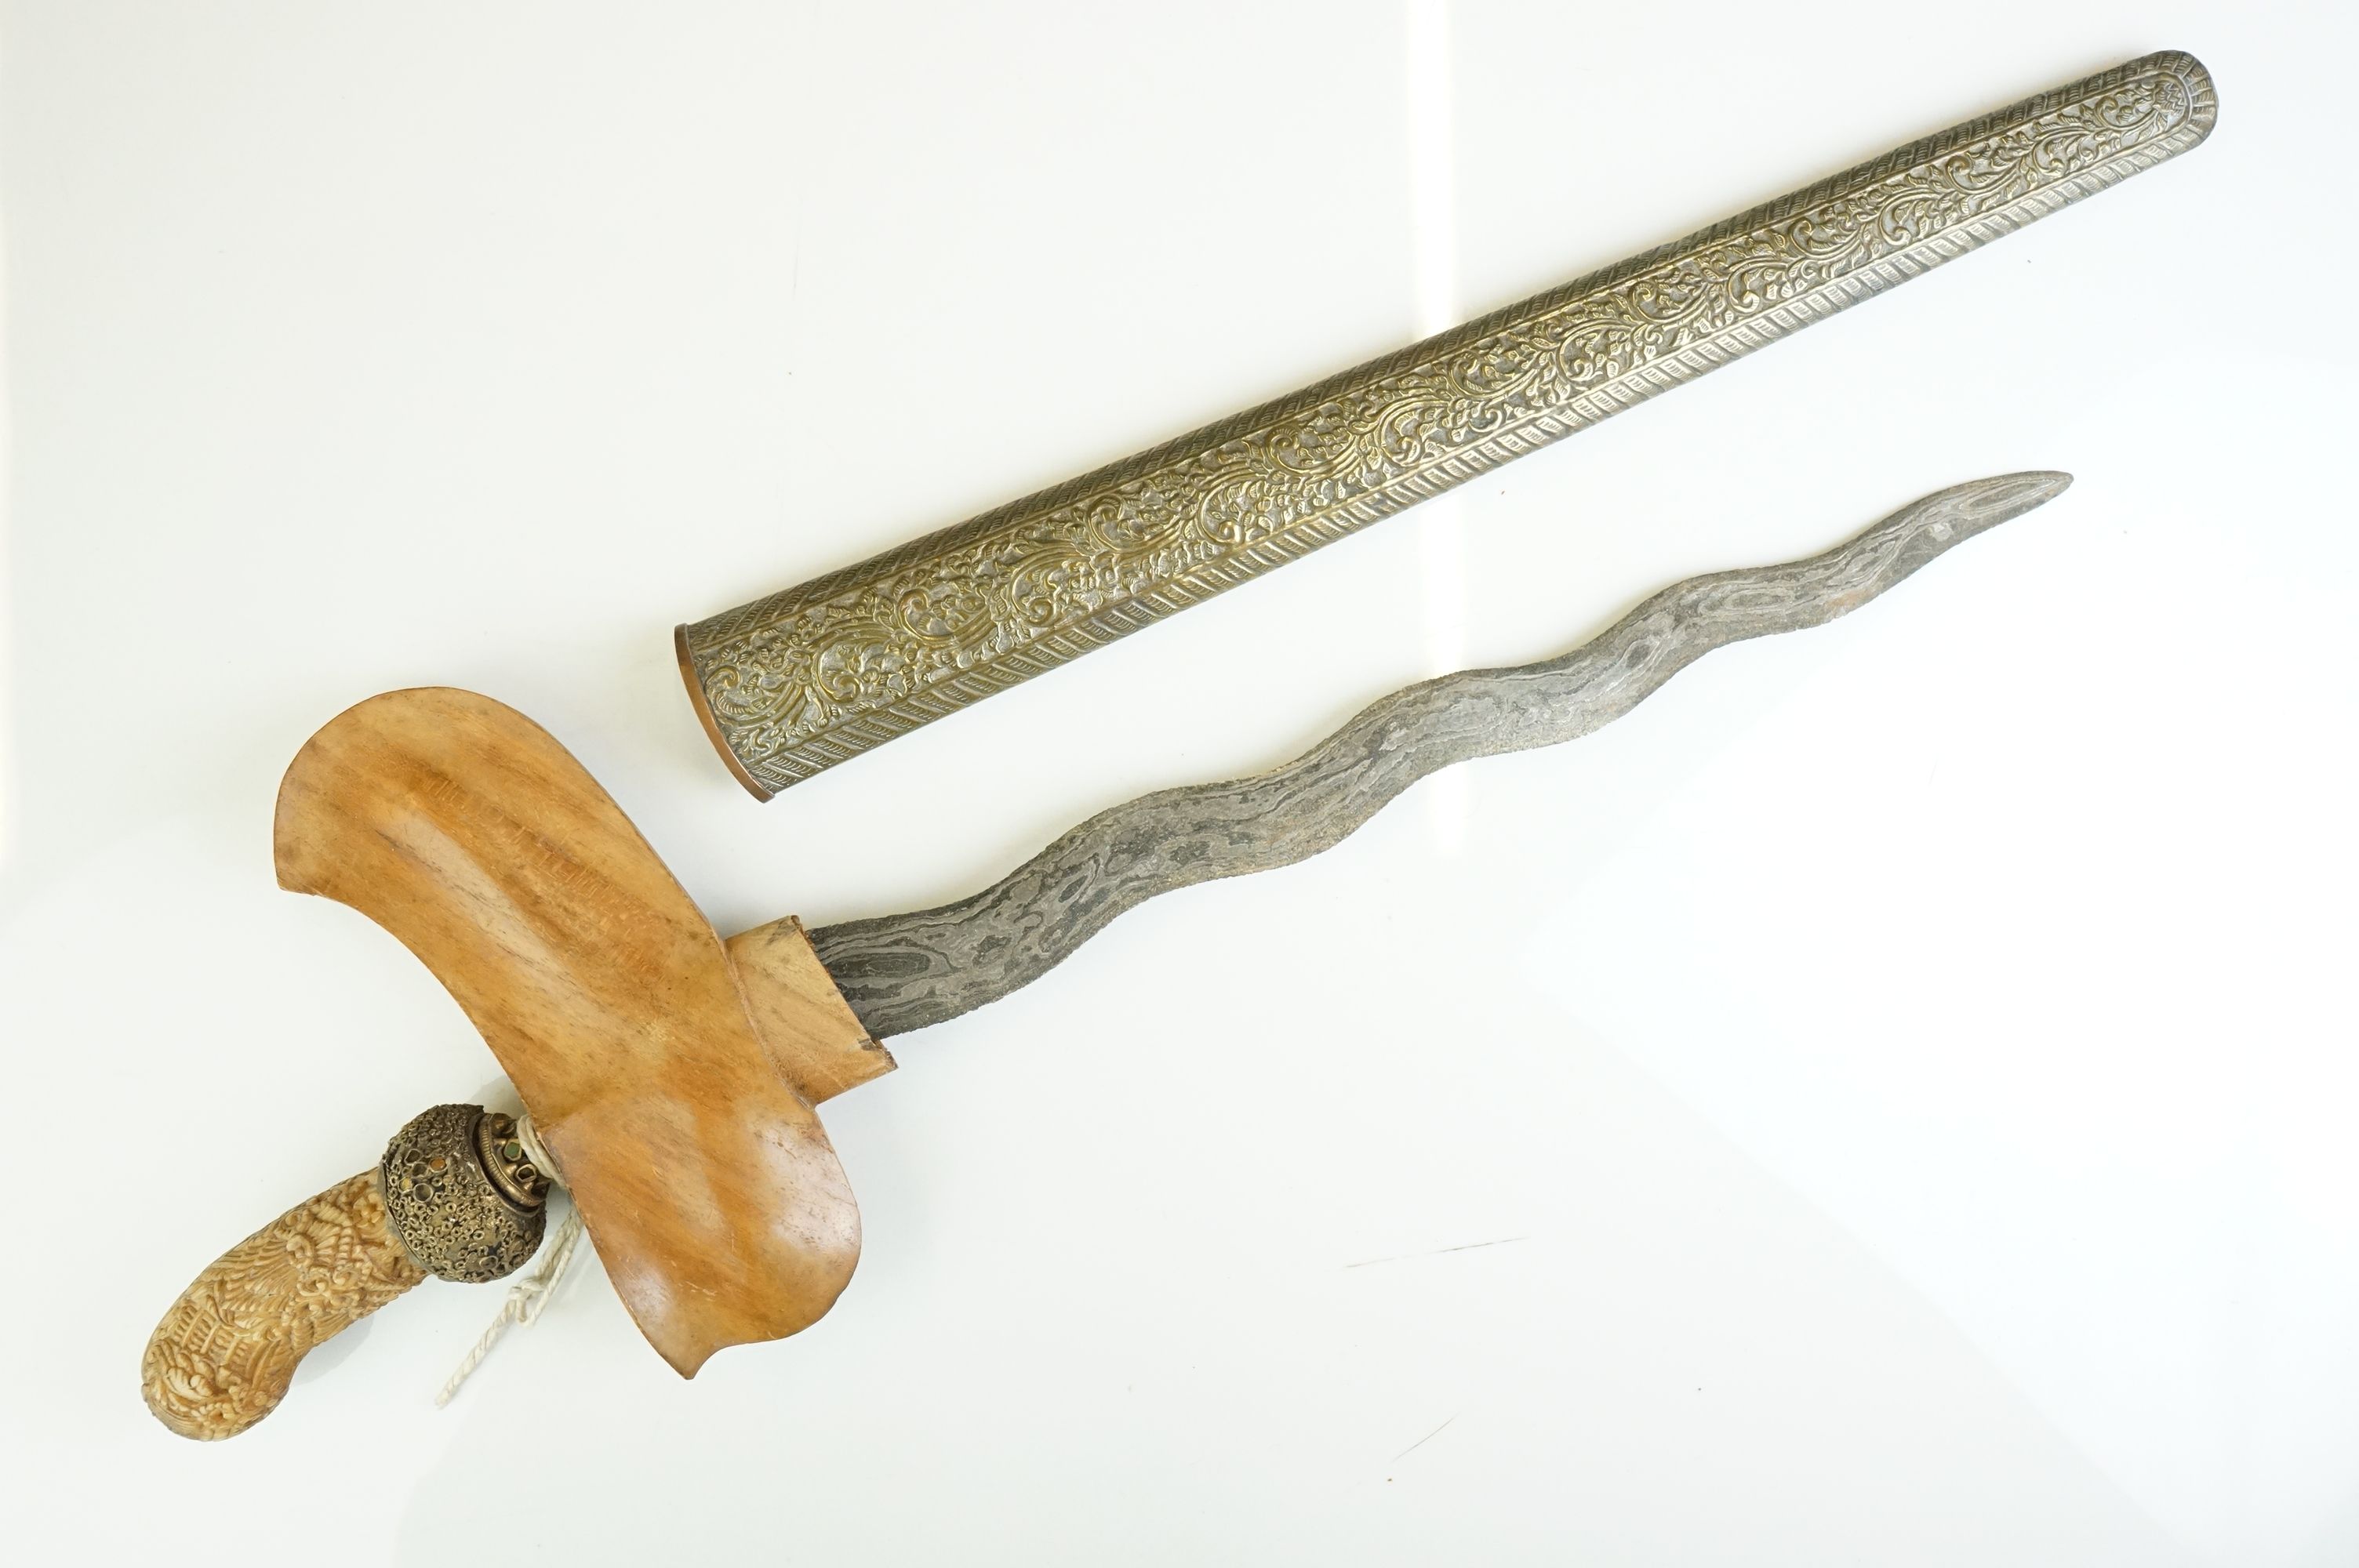 A 19th/20th Century Malaysian Kris Dagger with typical hand-forged wavy blade. It comes complete